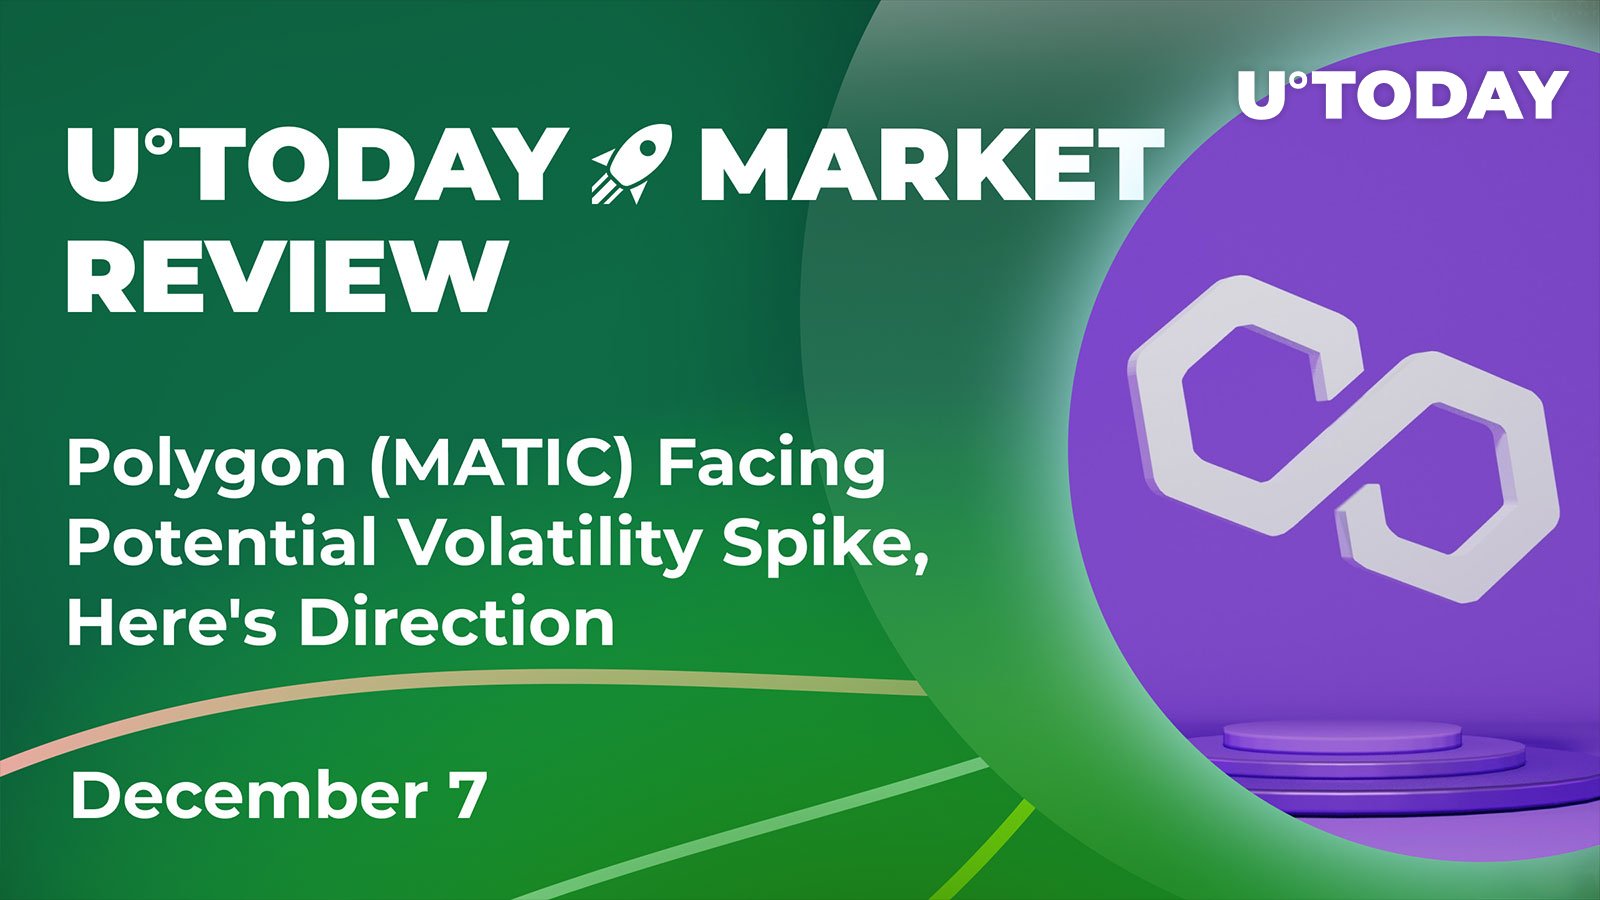 Polygon (MATIC) Facing Potential Volatility Spike, Here's Direction: Crypto Market Review, Dec. 7